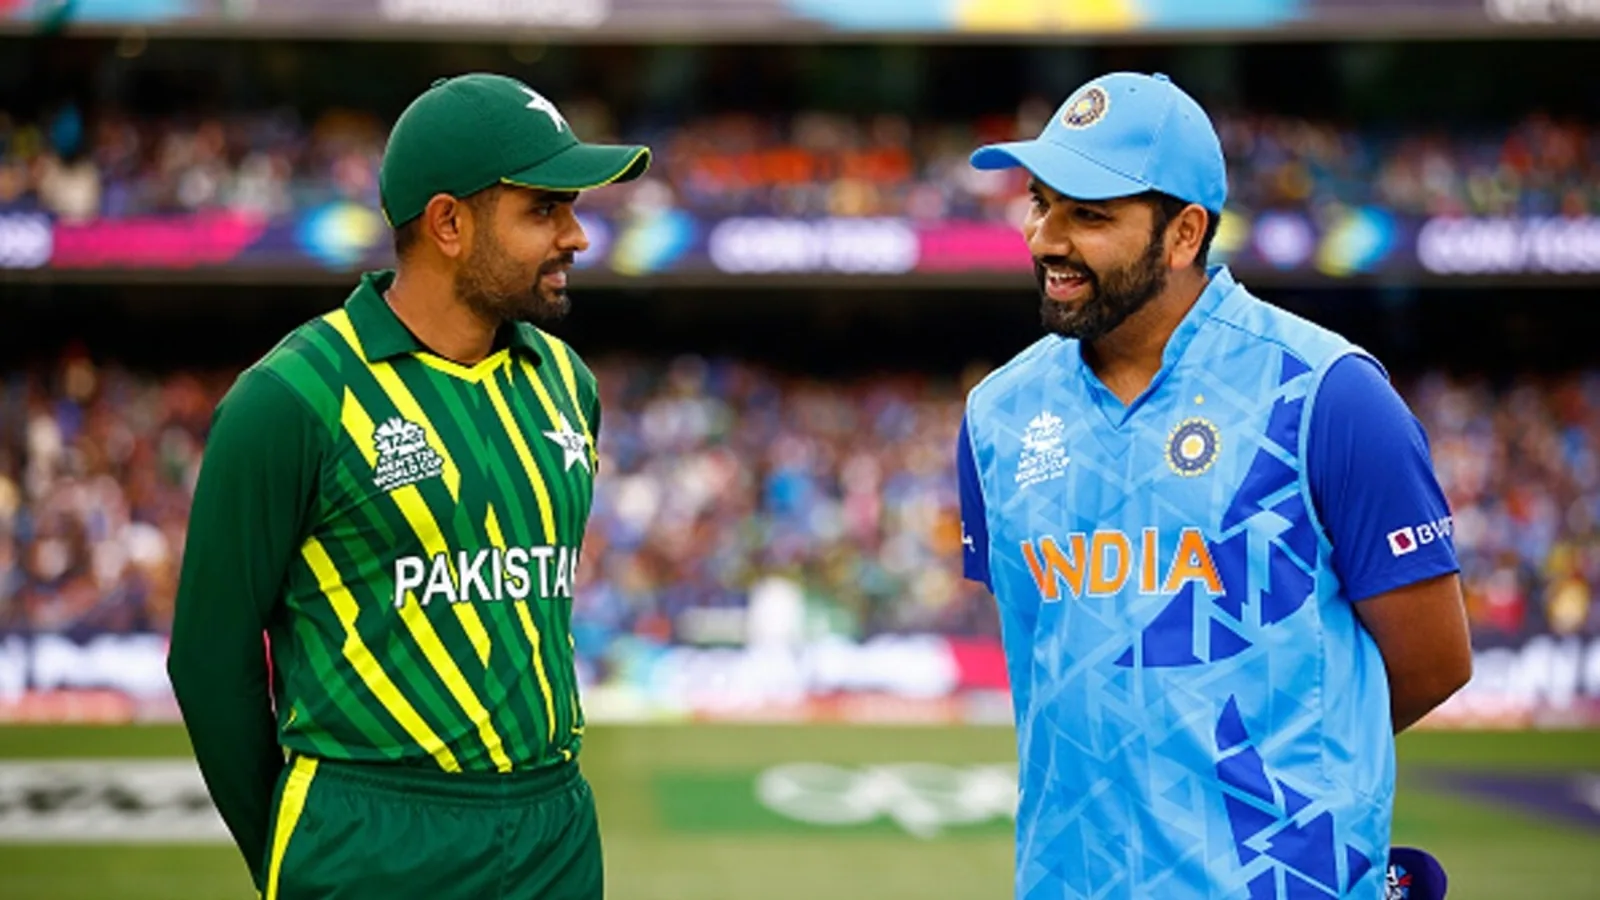 ICC Makes An Important Announcement Regarding India Vs Pakistan; READ To Know About It